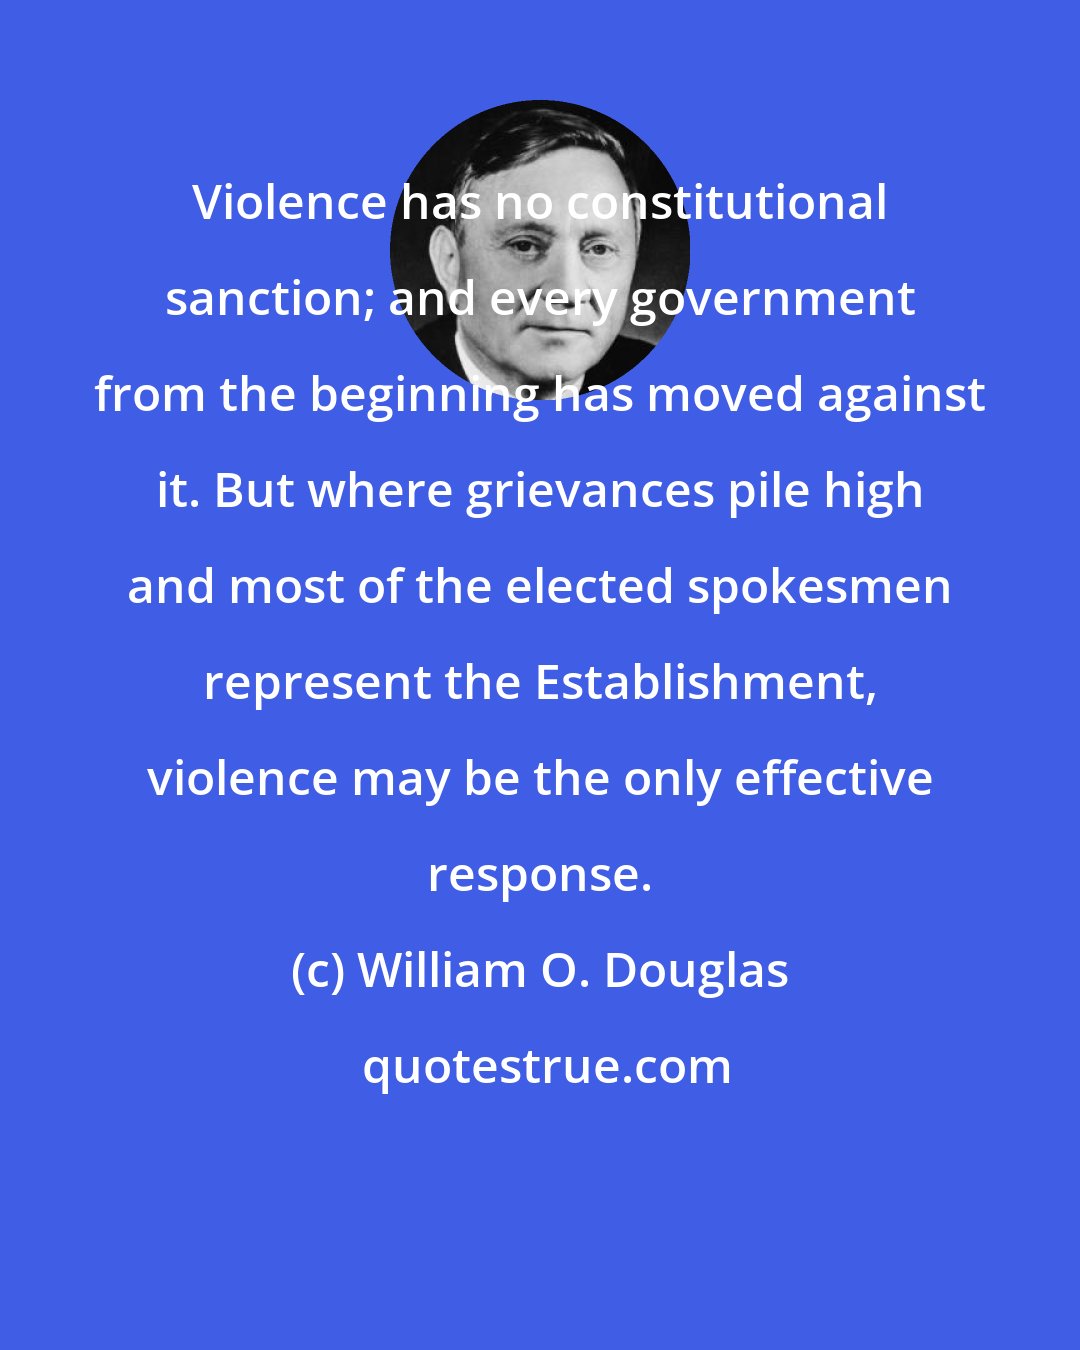 William O. Douglas: Violence has no constitutional sanction; and every government from the beginning has moved against it. But where grievances pile high and most of the elected spokesmen represent the Establishment, violence may be the only effective response.